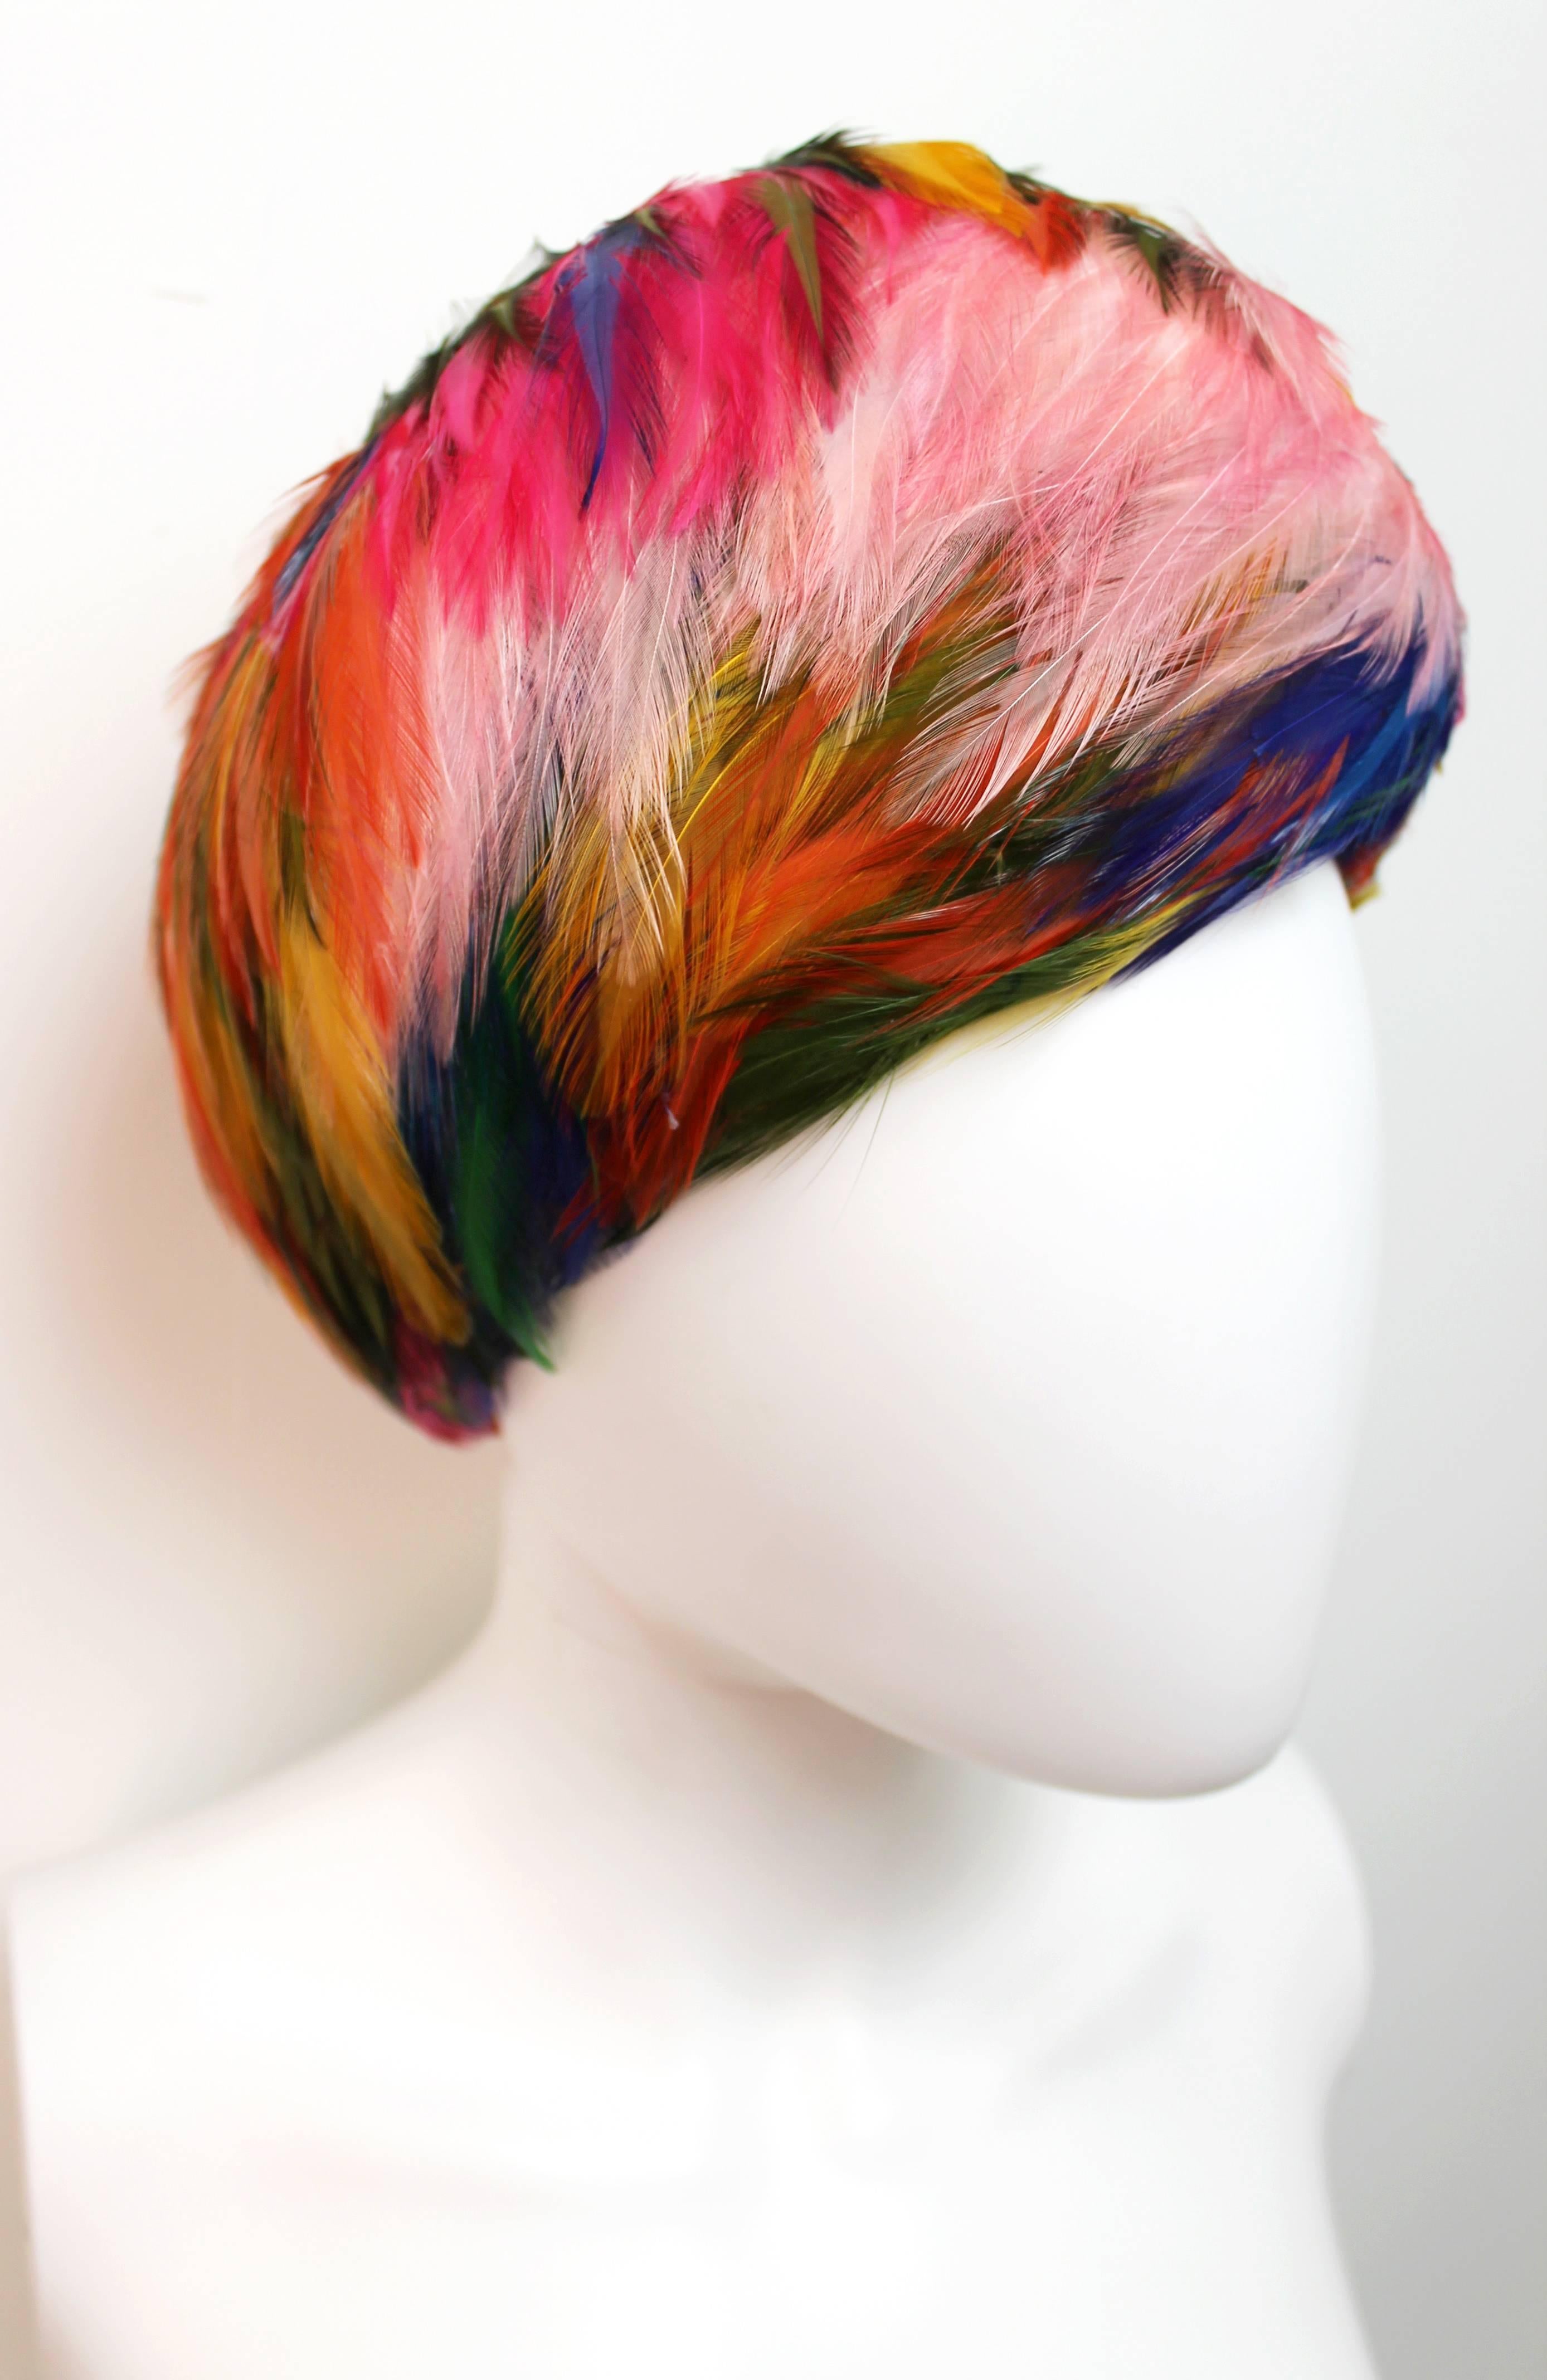 Beautiful hat by Christian Dior from 1960. Features vibrantly colored feathers that form a rounded shape around the head. Comes with the original box.